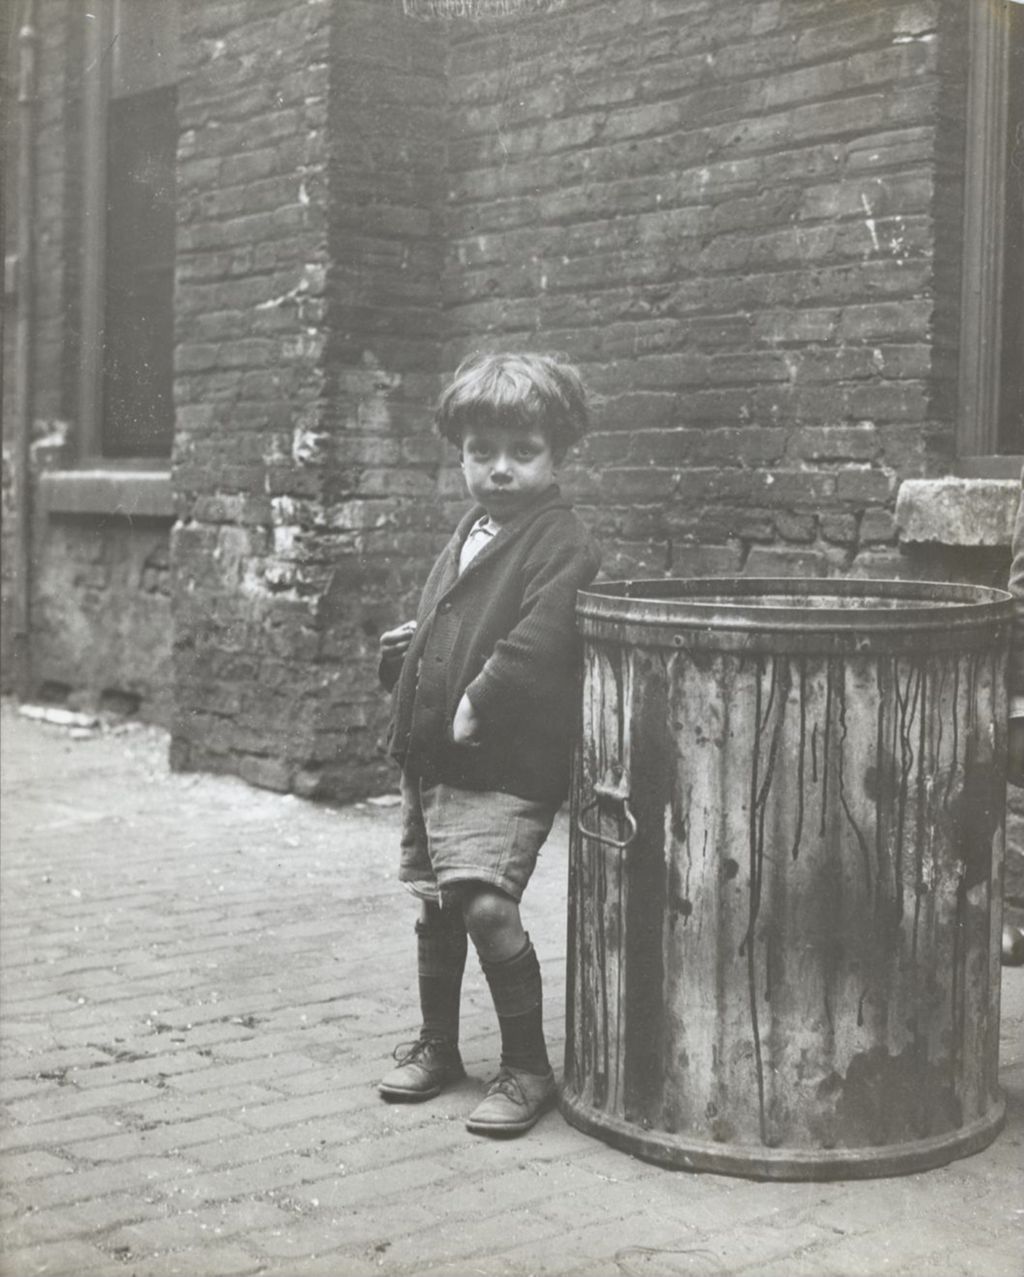 Young boy (Dom Esposito) standing next to garbage can in alley